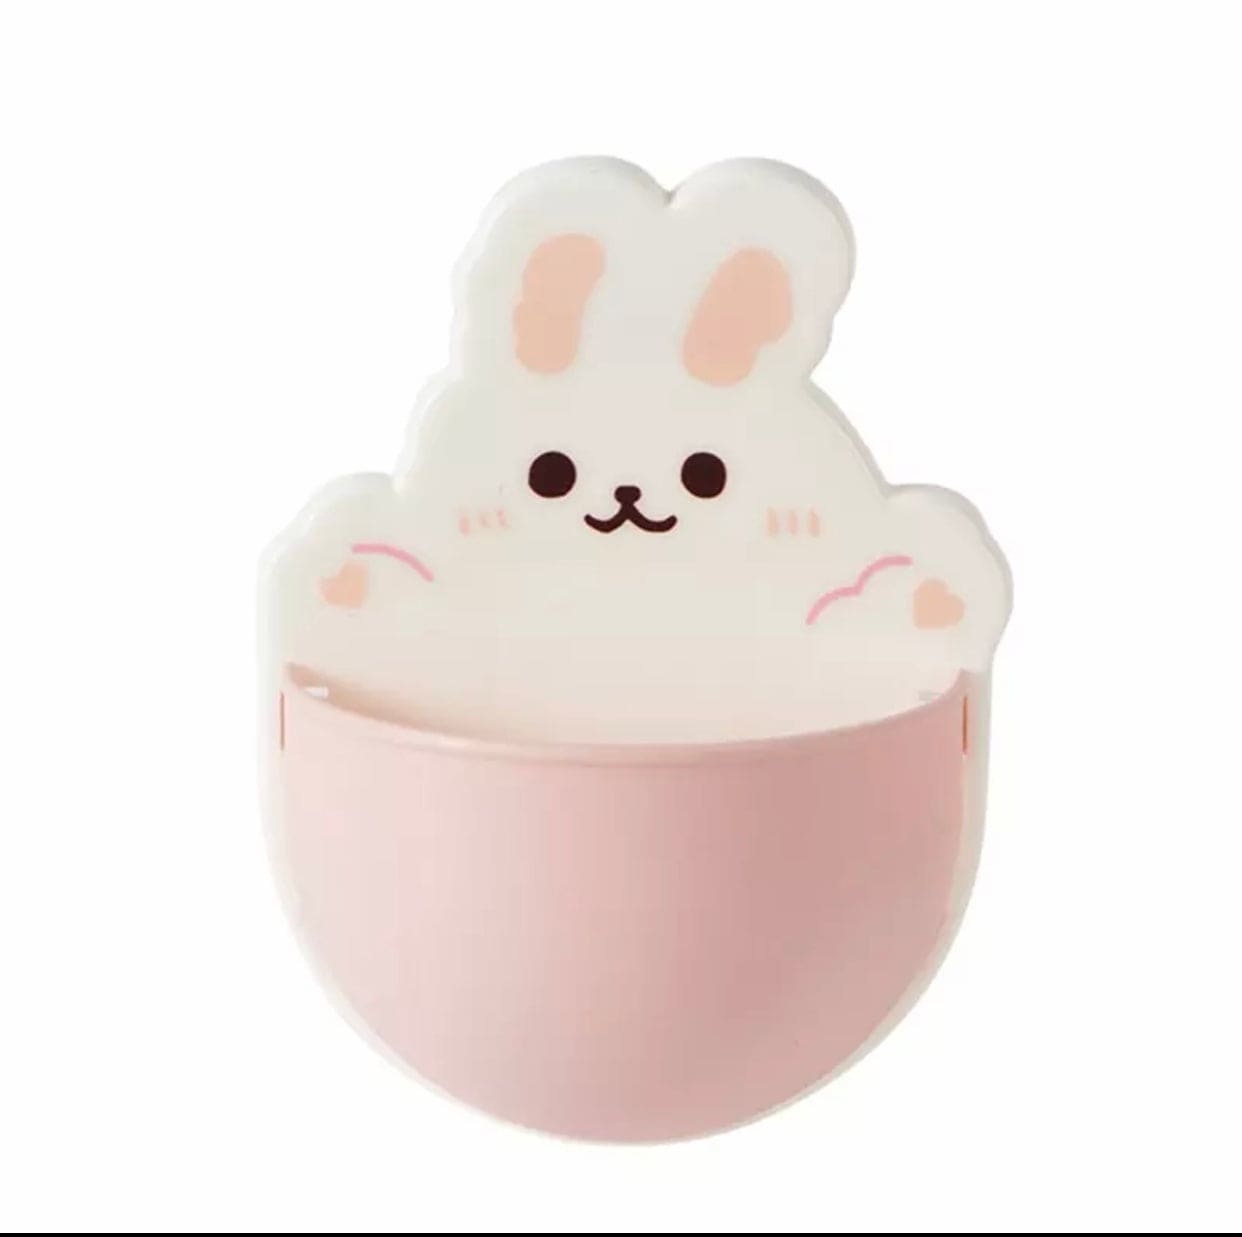 Cute Cartoon Shaped Wall Mounted Phone And Stationary Holder, Self Adhesive Drain Free Comb Toothpaste Storage Box, Toilet Toothbrush Rack